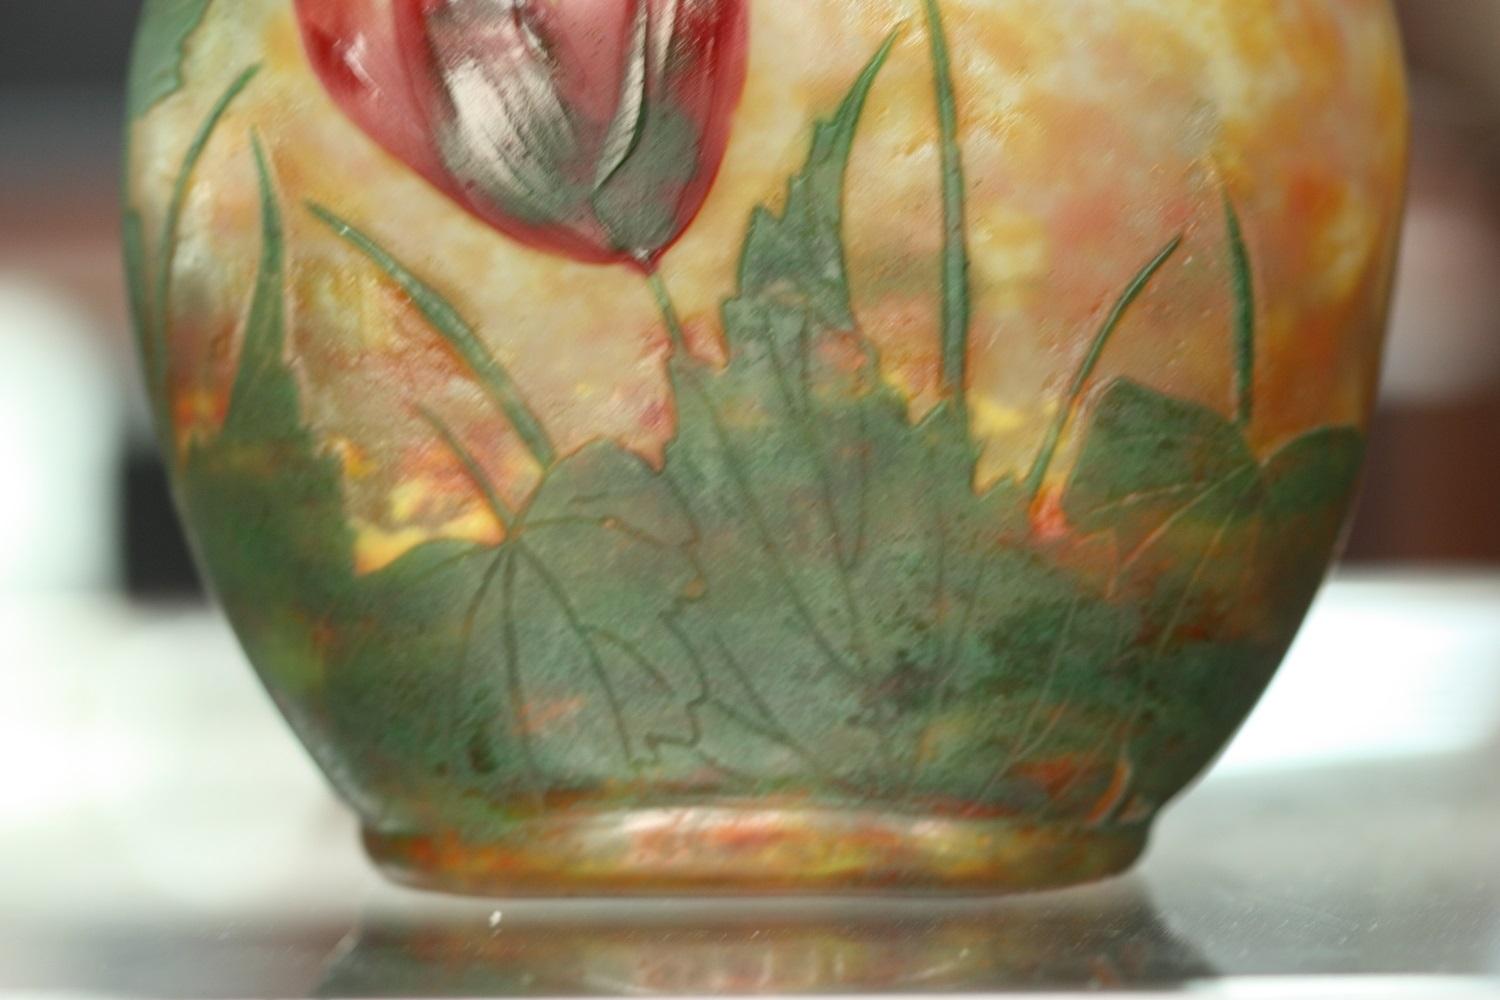 From the Pinhas collection
A fine Daum Nancy wheel-carved cameo glass vase with low relief applied decoration
France, circa 1915
Signed with intaglio mark Daum Nancy with Lorraine cross
Dimension:
Width 5.70 in. (14.5 cm.)
Depth 3.14 in. (8